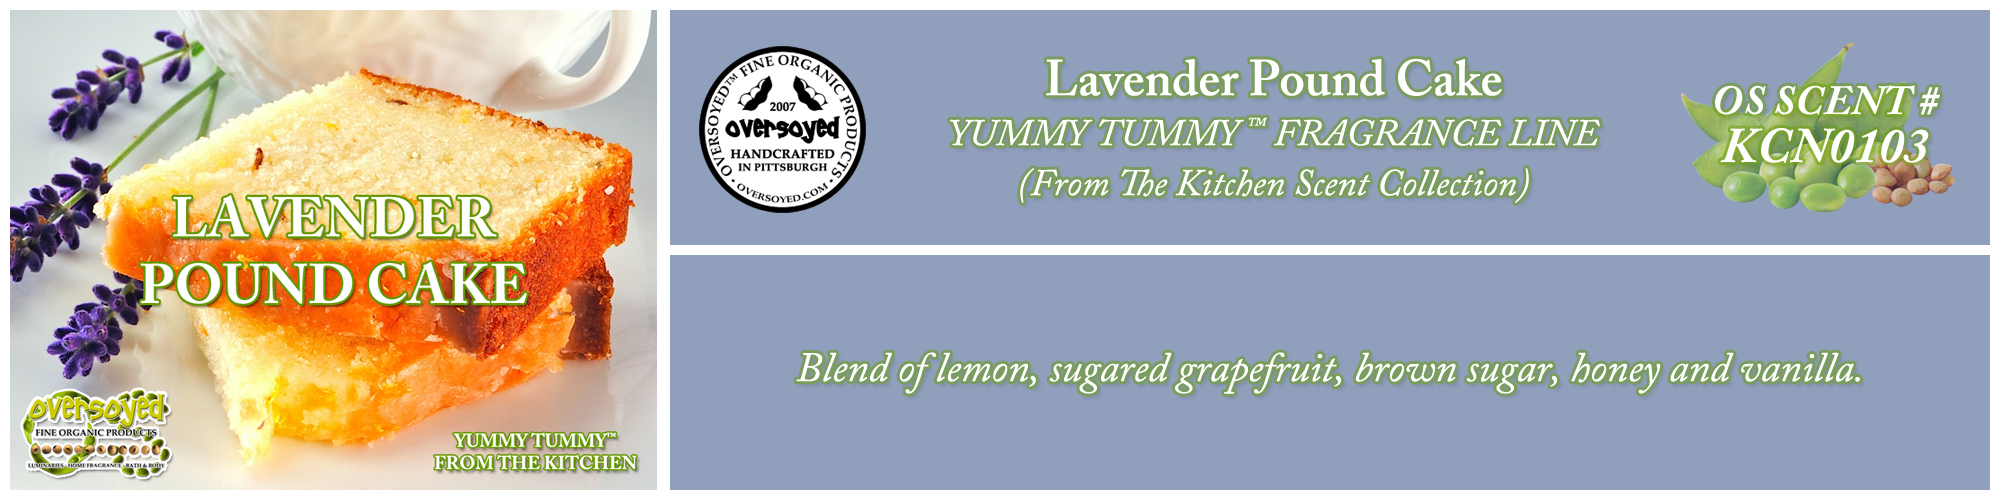 Lavender Pound Cake Handcrafted Products Collection